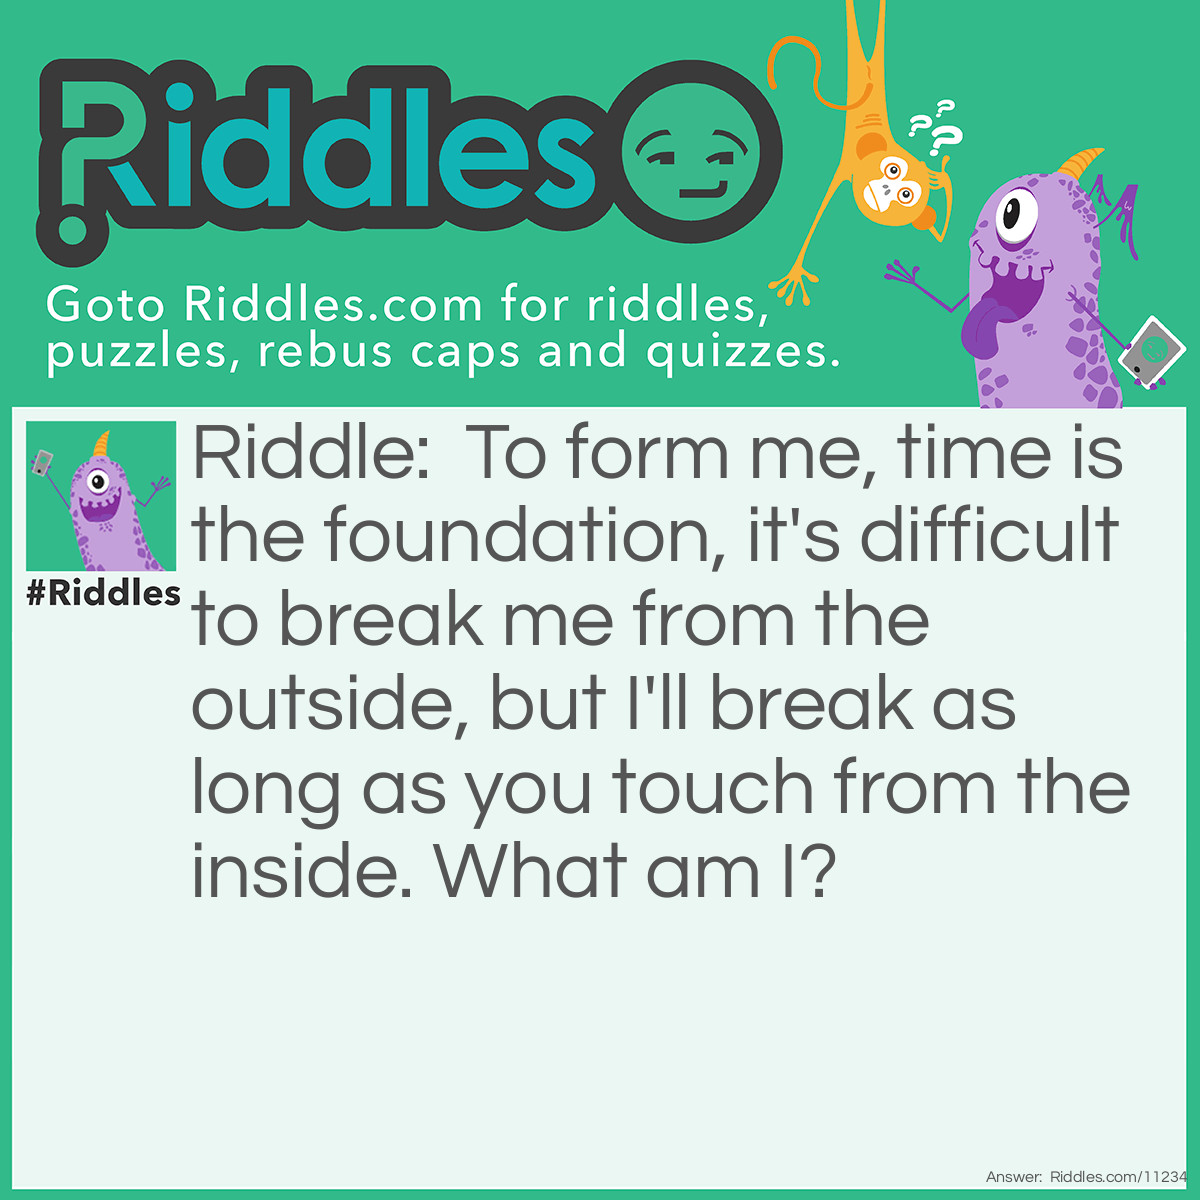 Riddle: To form me, time is the foundation, it's difficult to break me from the outside, but I'll break as long as you touch from the inside. What am I? Answer: Trust.